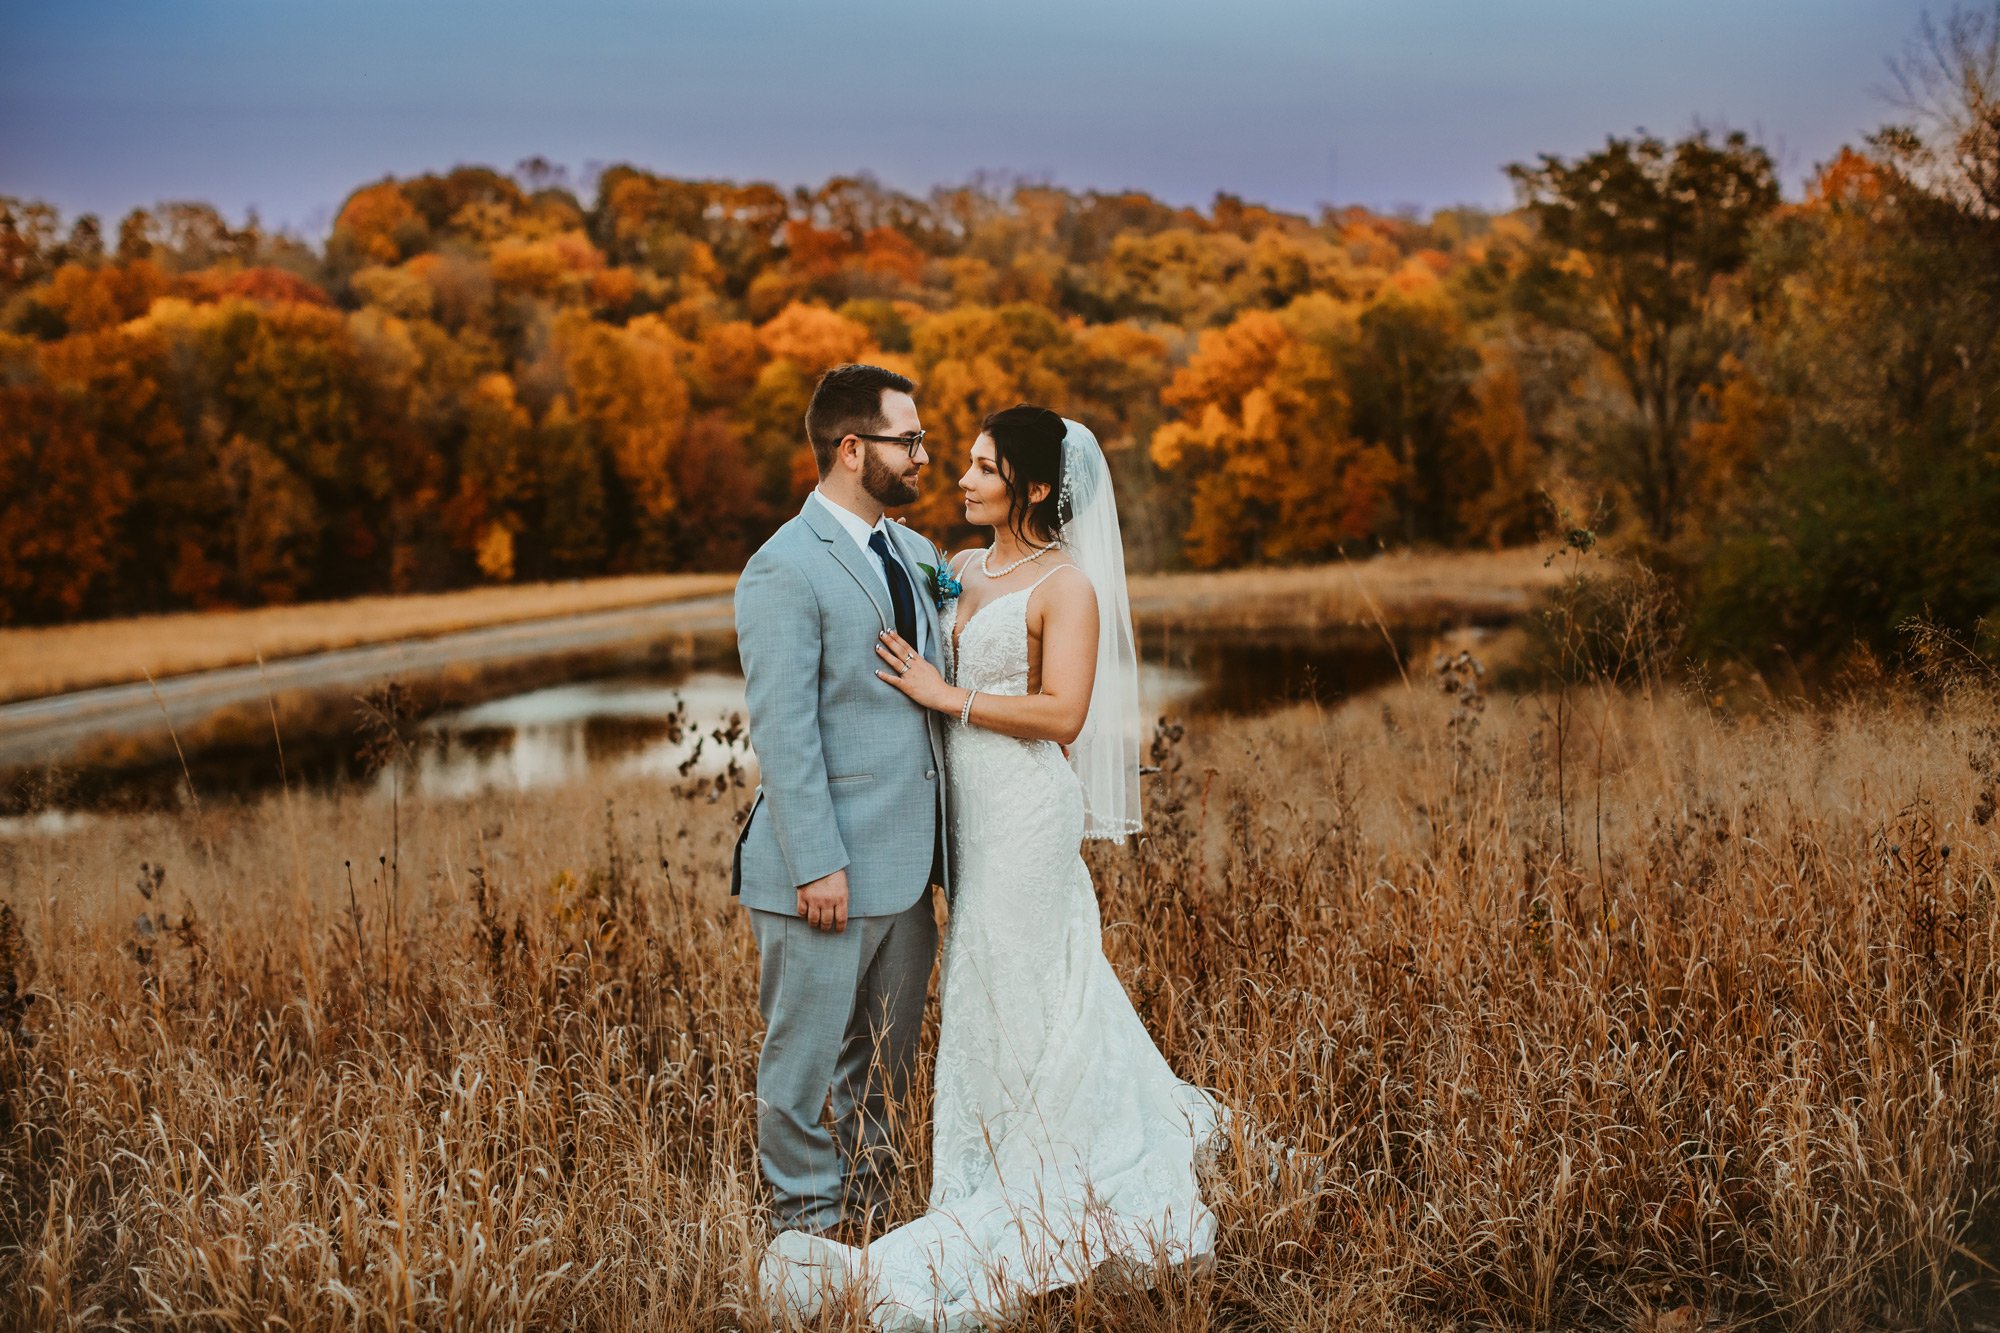  With a pond, yellow grass, and fall trees a bride and groom fall in love with Teala Ward Photography. season weddings #TealaWardPhotography #TealaWardWeddings #WeddingLocationsIllinois #IllinoisWedding #weddingdetails #weddingphotography #married 